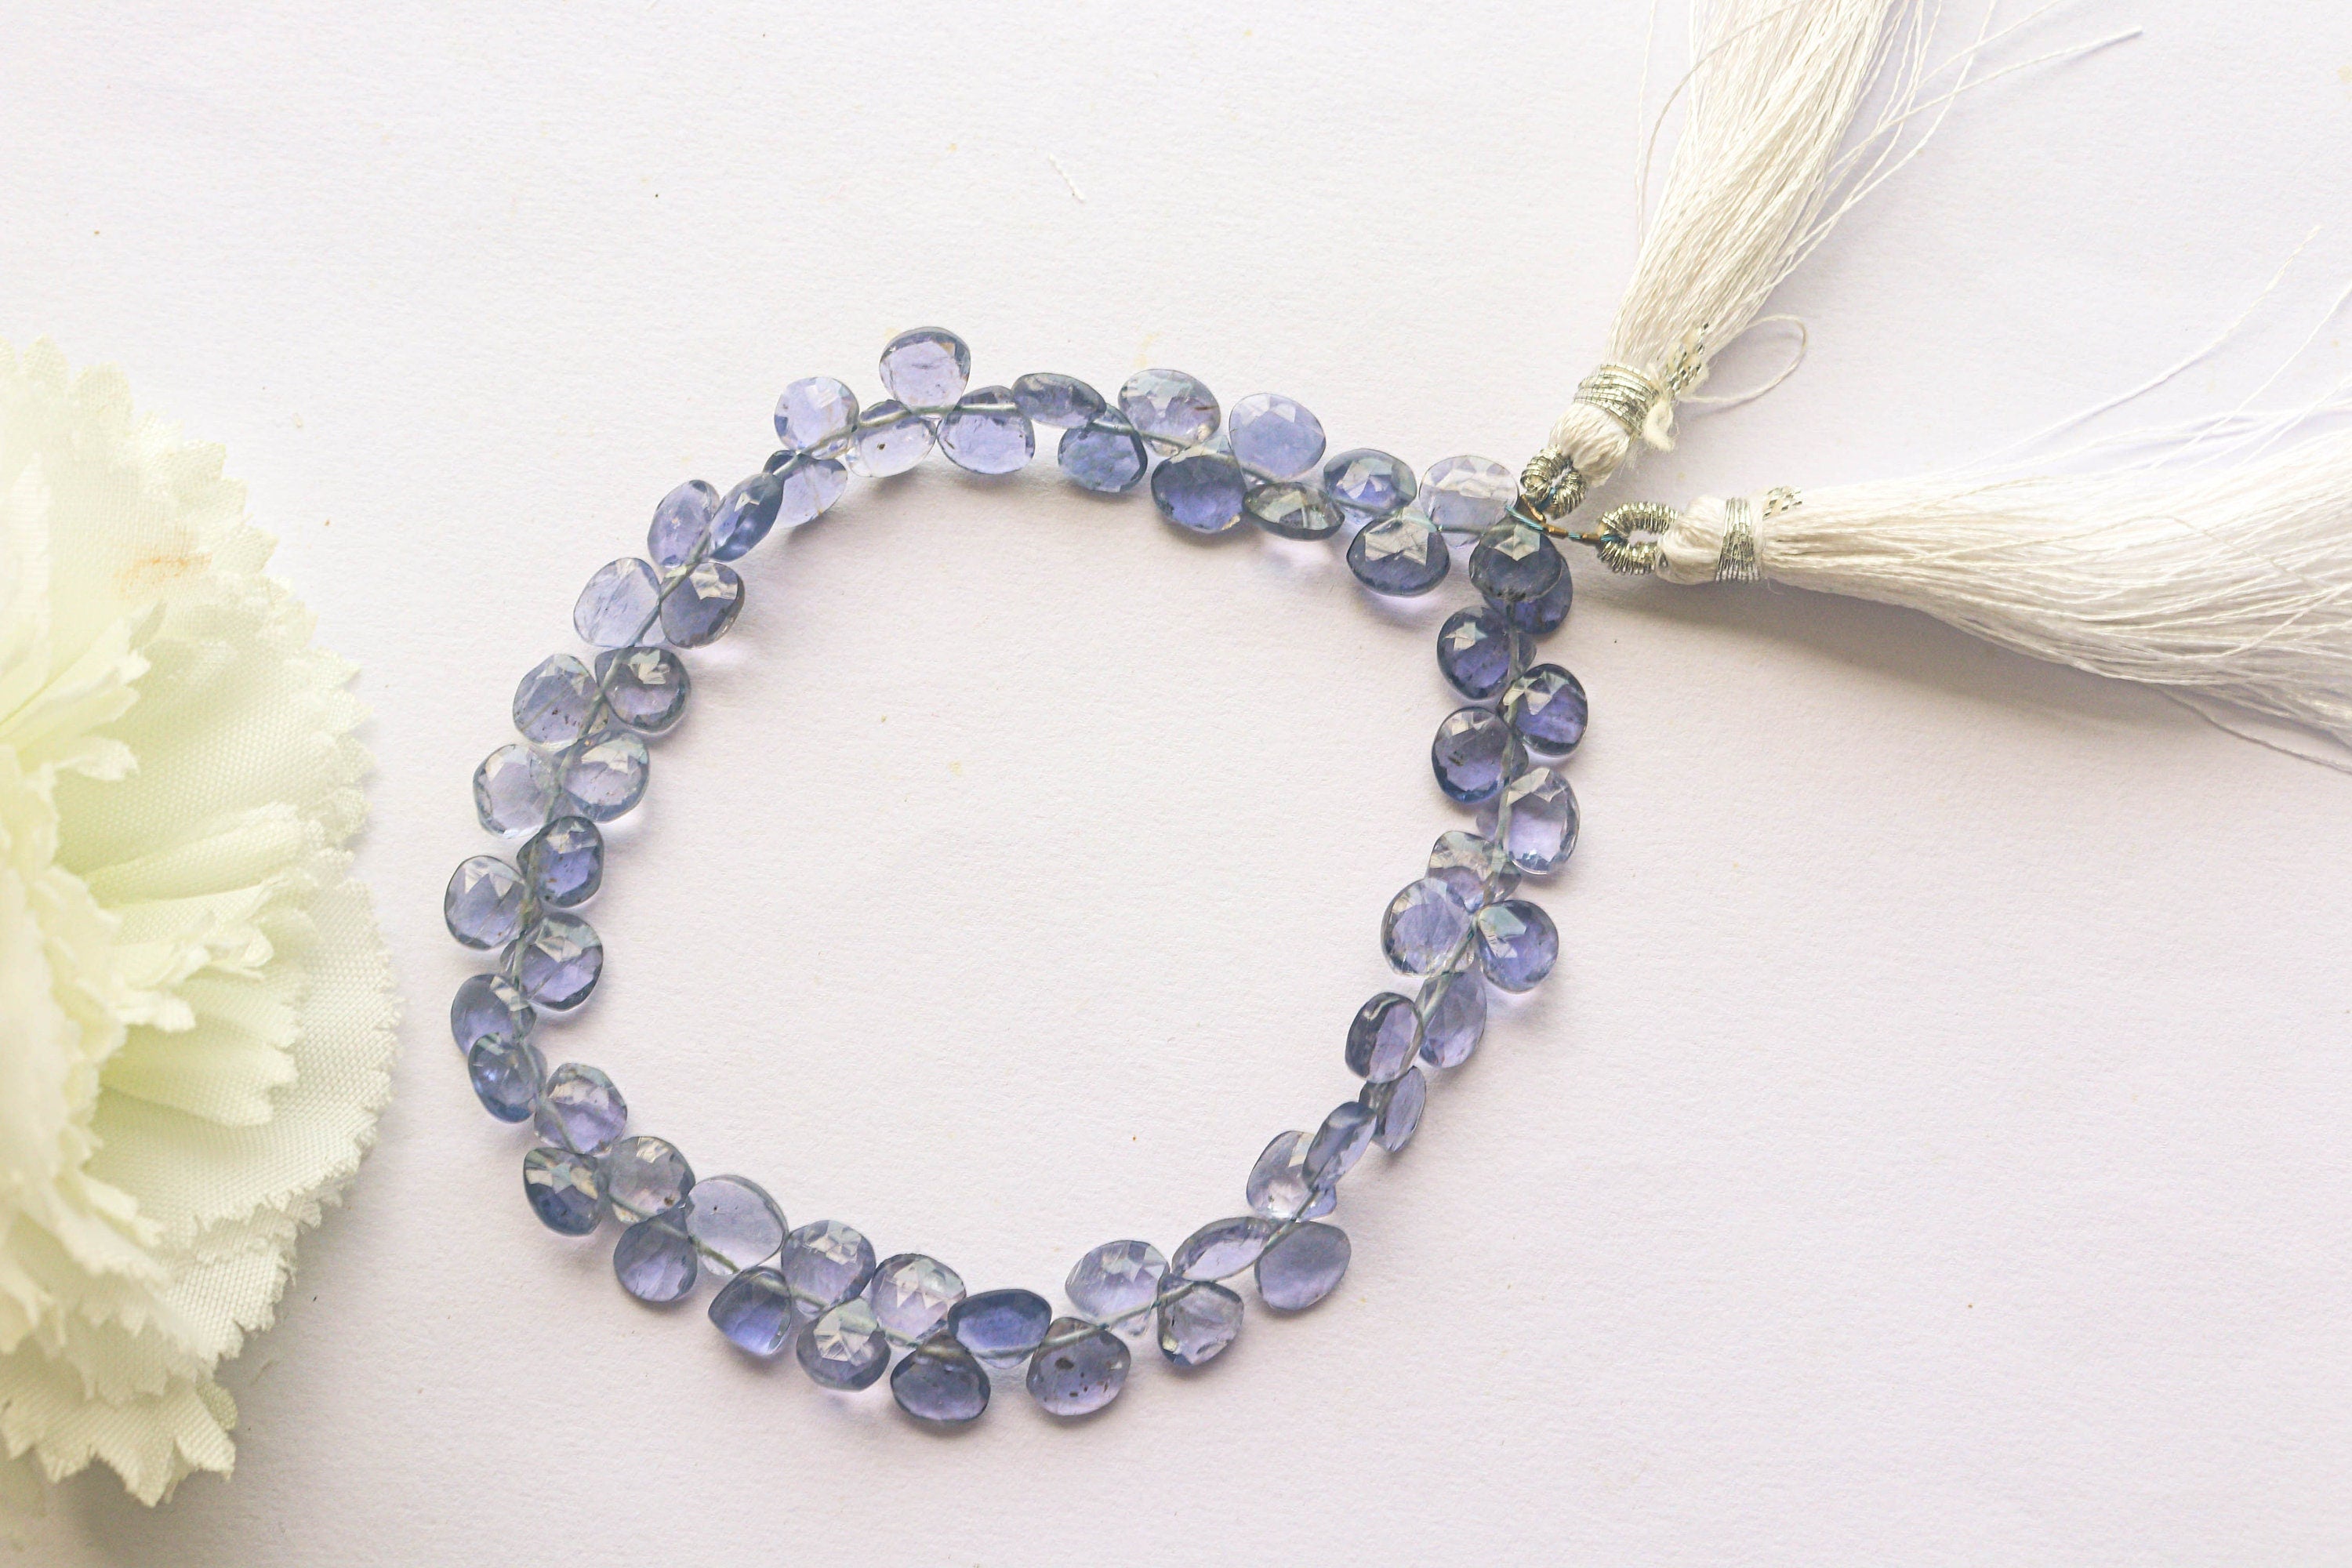 Iolite Faceted Briolette Heart Shape | 6x6mm | 56 Pieces | 8 inch Full Strand | Natural Gemstone Beads for jewelry making Beadsforyourjewelry